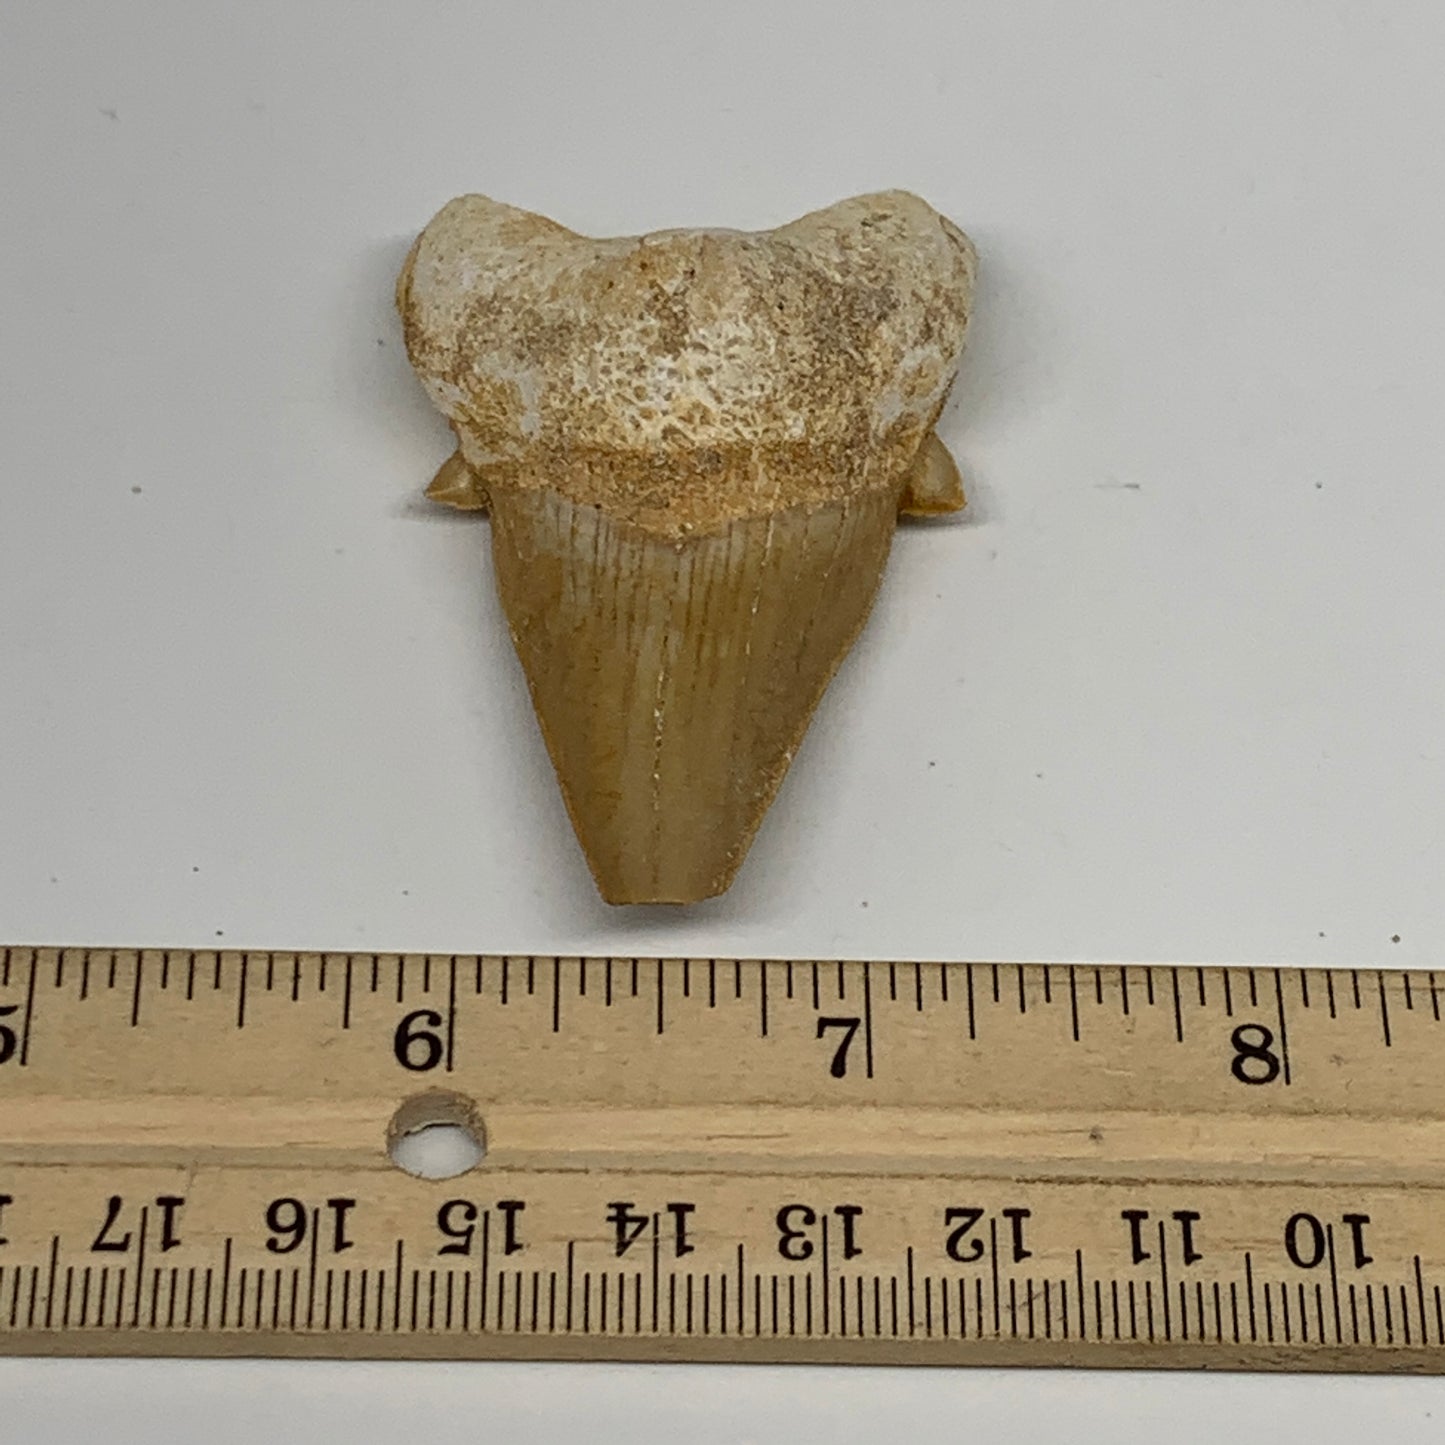 29.8g, 2.4"X 1.5"x 0.8" Natural Fossils Fish Shark Tooth @Morocco, B12724